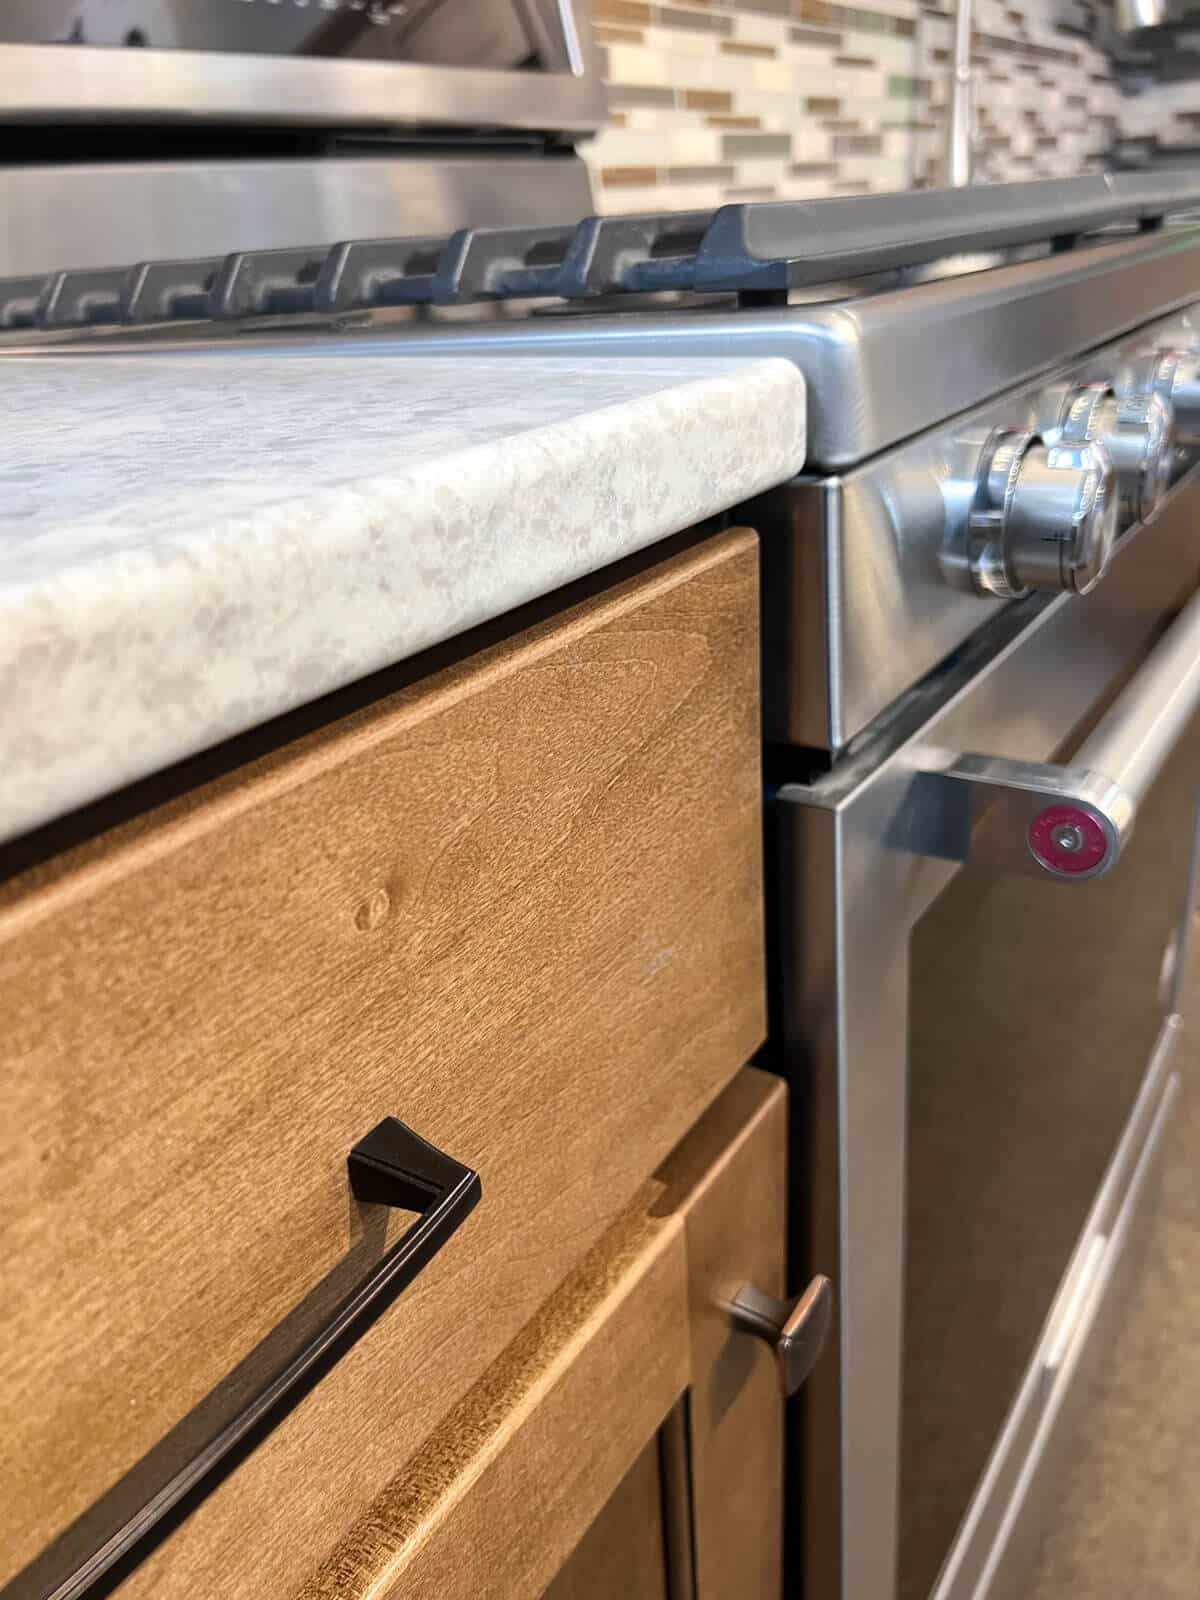 stainless steal oven with wood cabinets quartz countertop.